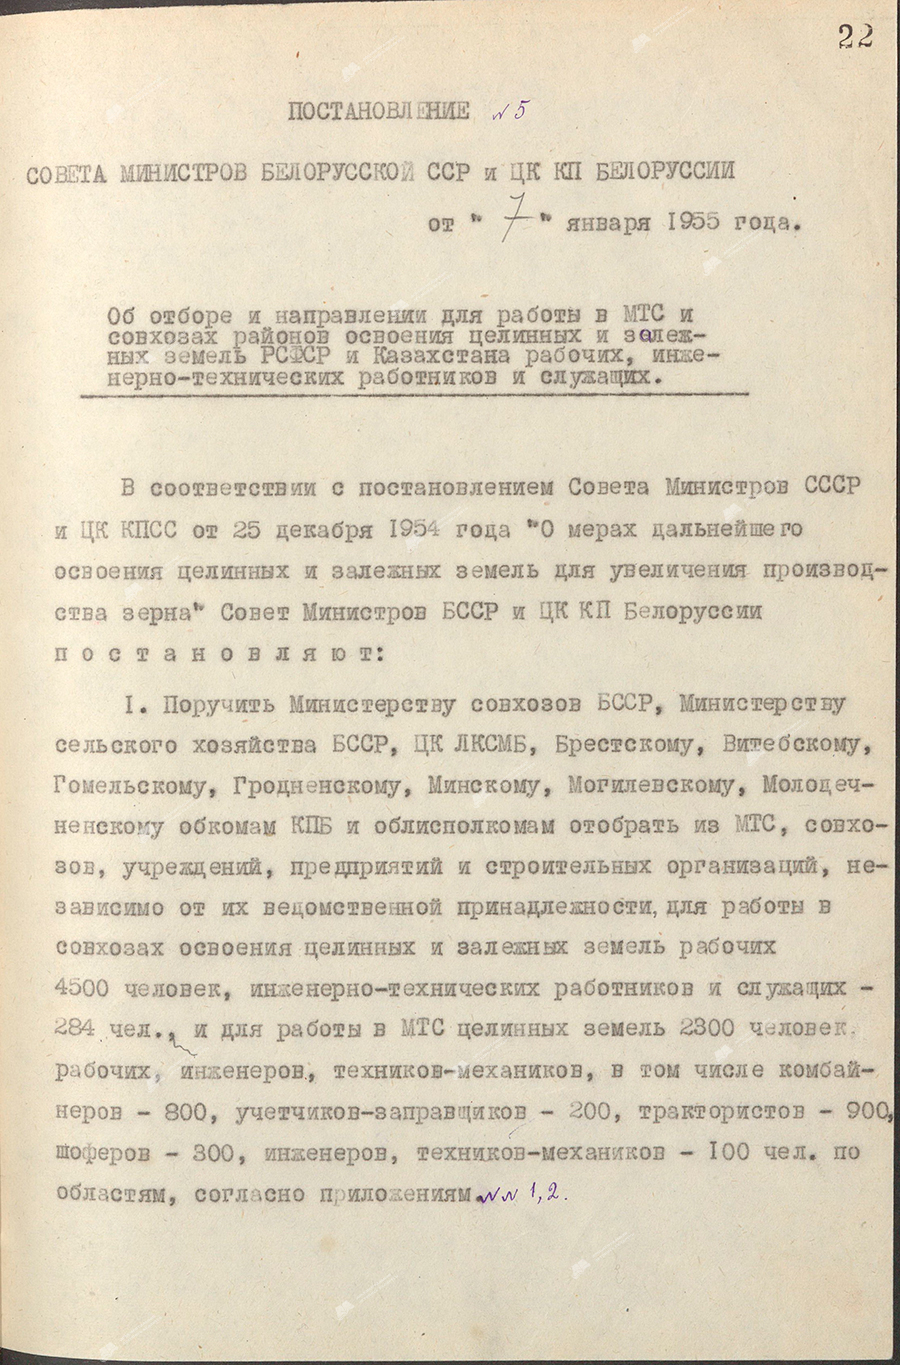 Resolution No. 5 of the Council of Ministers of the BSSR and the Central Committee of the Communist Party of Belarus «On the selection and assignment of workers, engineering and technical workers and employees to work in MTS and state farms in the areas of development of virgin and fallow lands of the RSFSR and Kazakhstan»-стр. 0